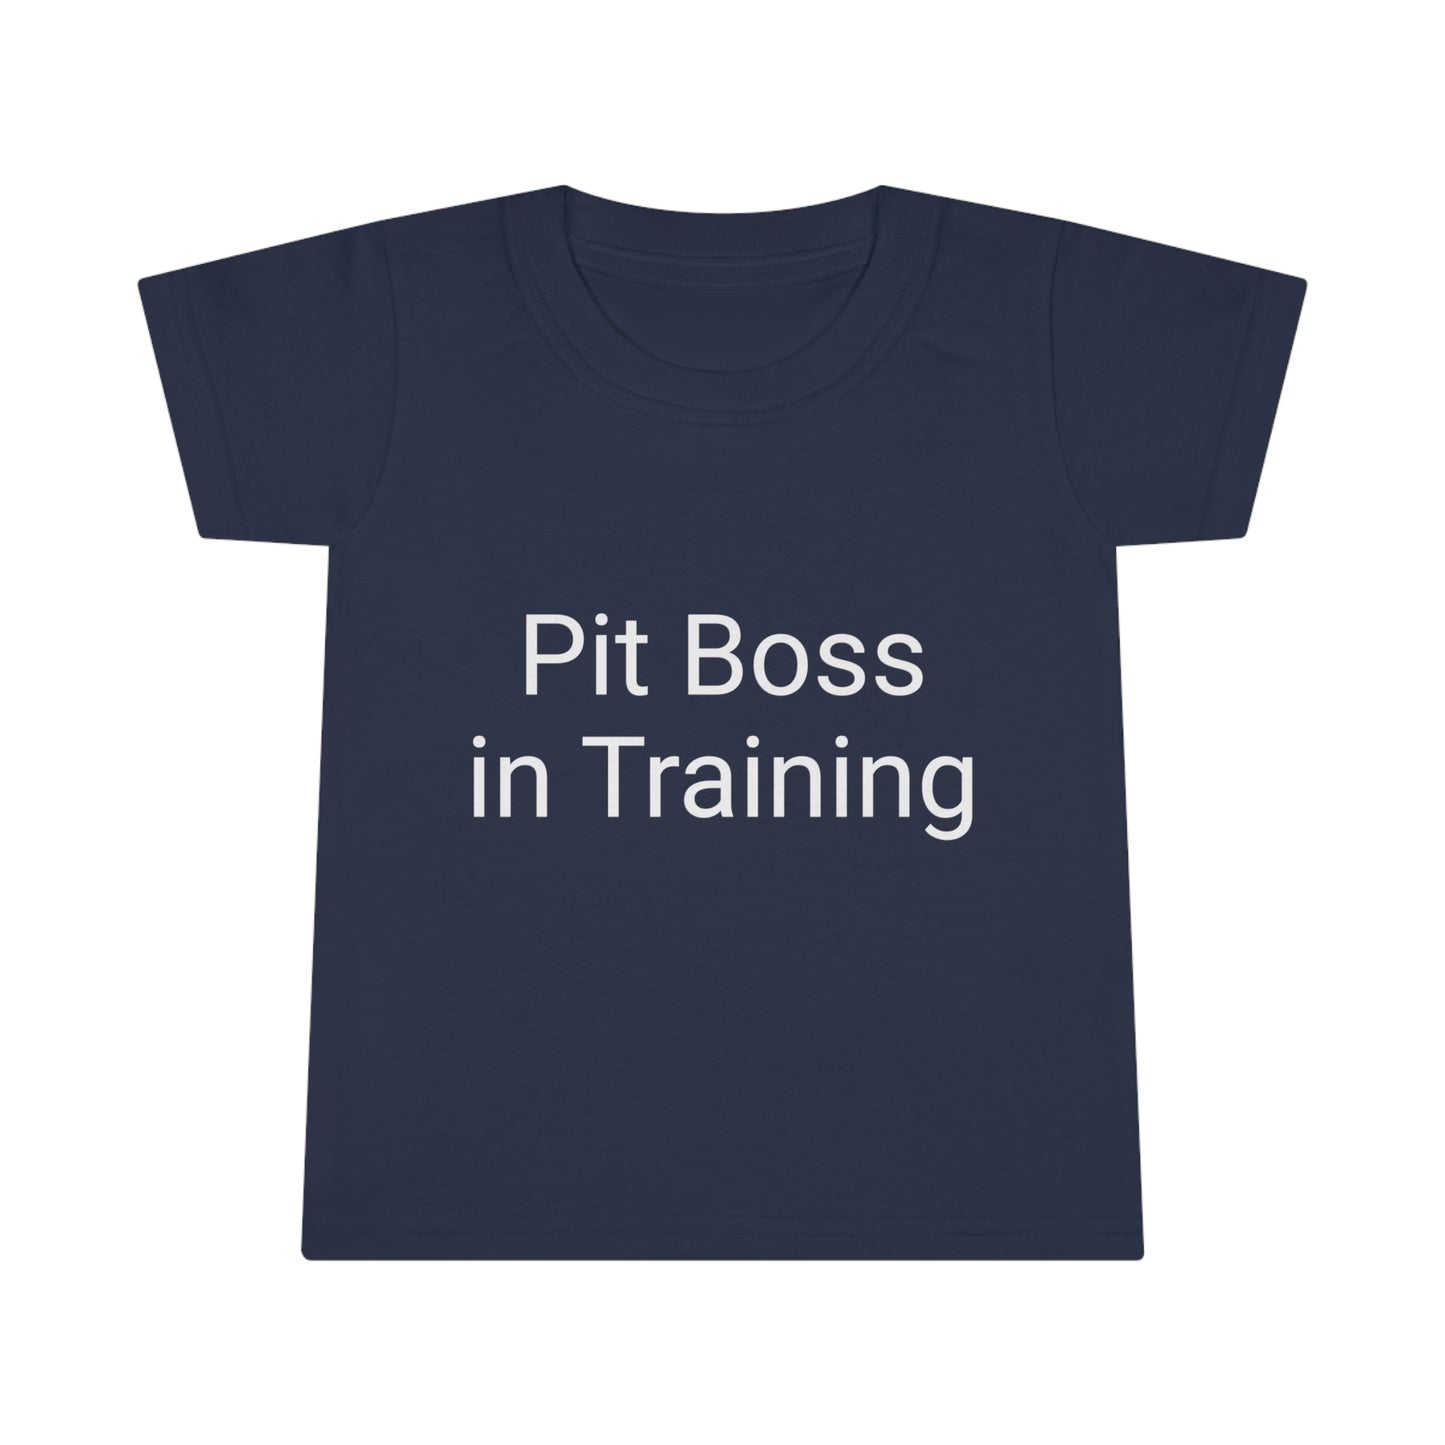 Pit Boss in Training Toddler T-shirt